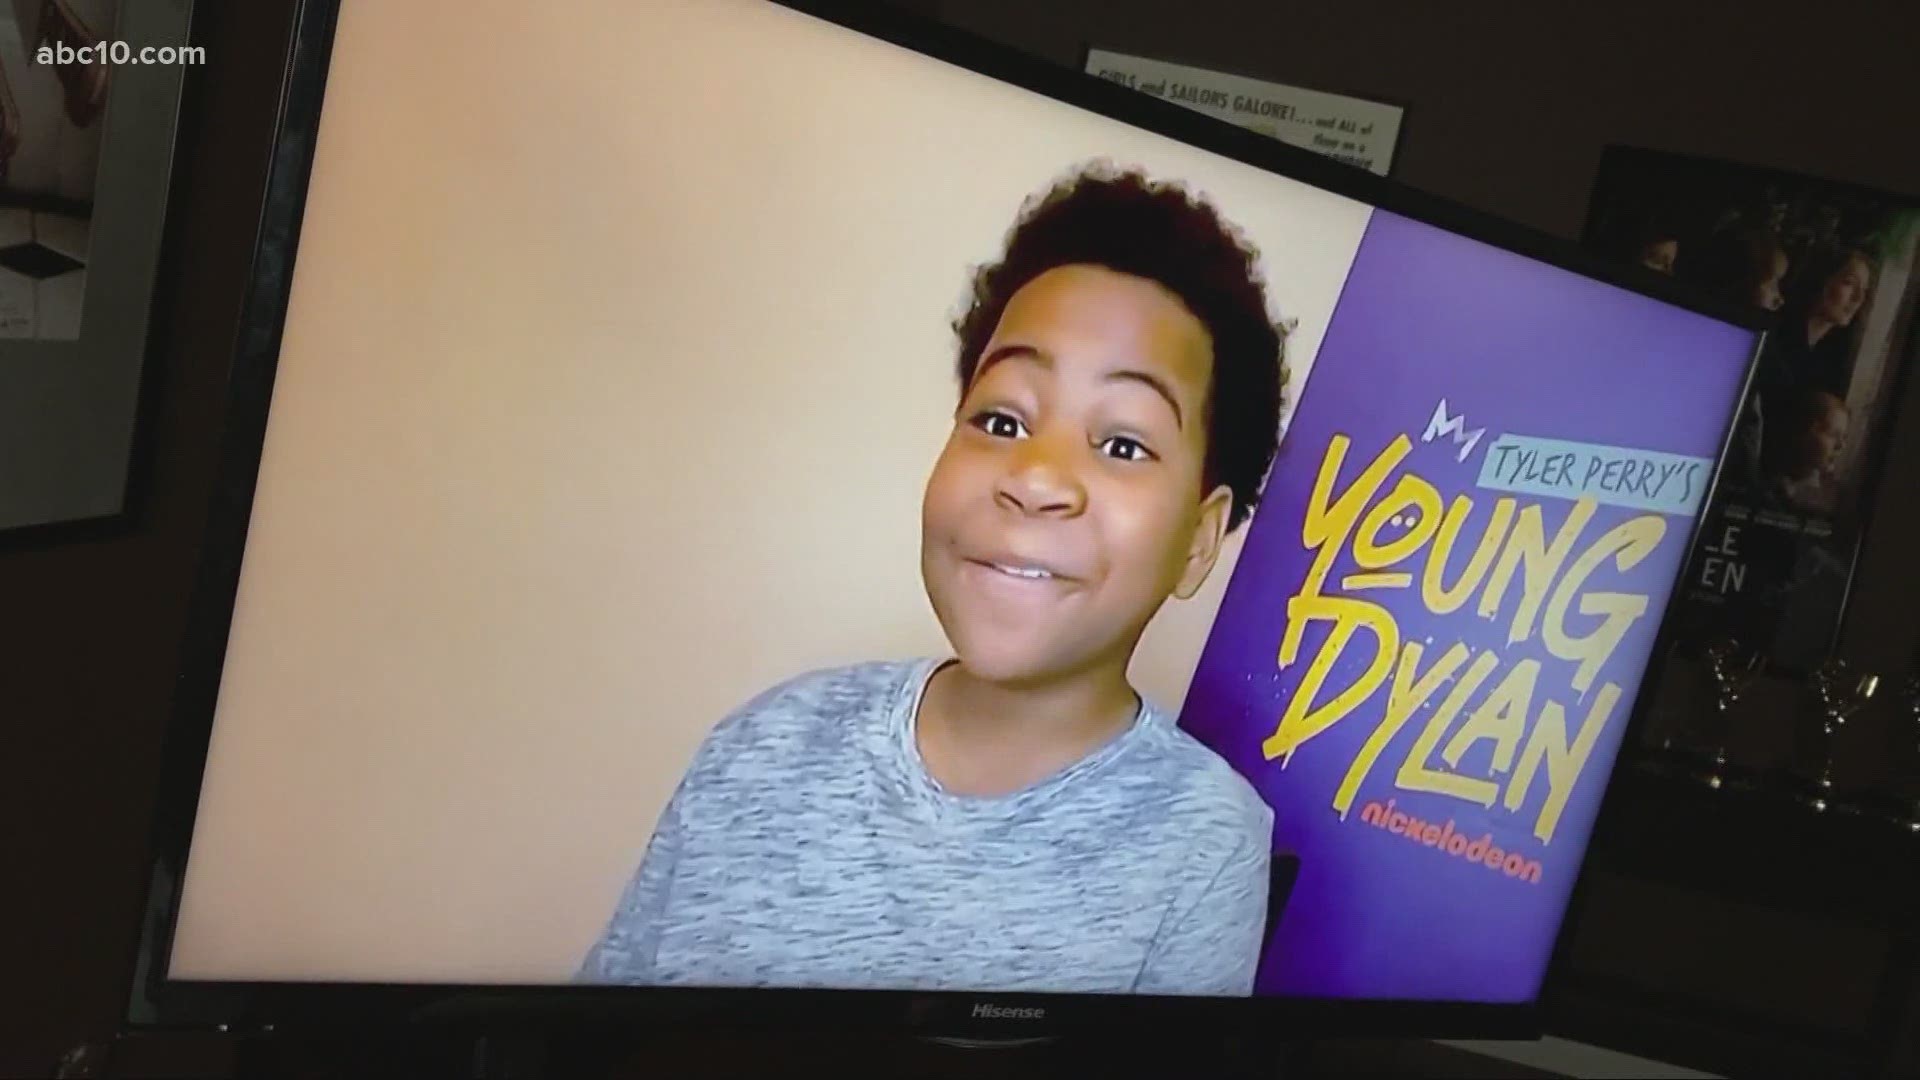 Mark S. Allen talks with Dylan Gilmer, star of 'Tyler Perry's Young Dylan' on Nickelodeon.